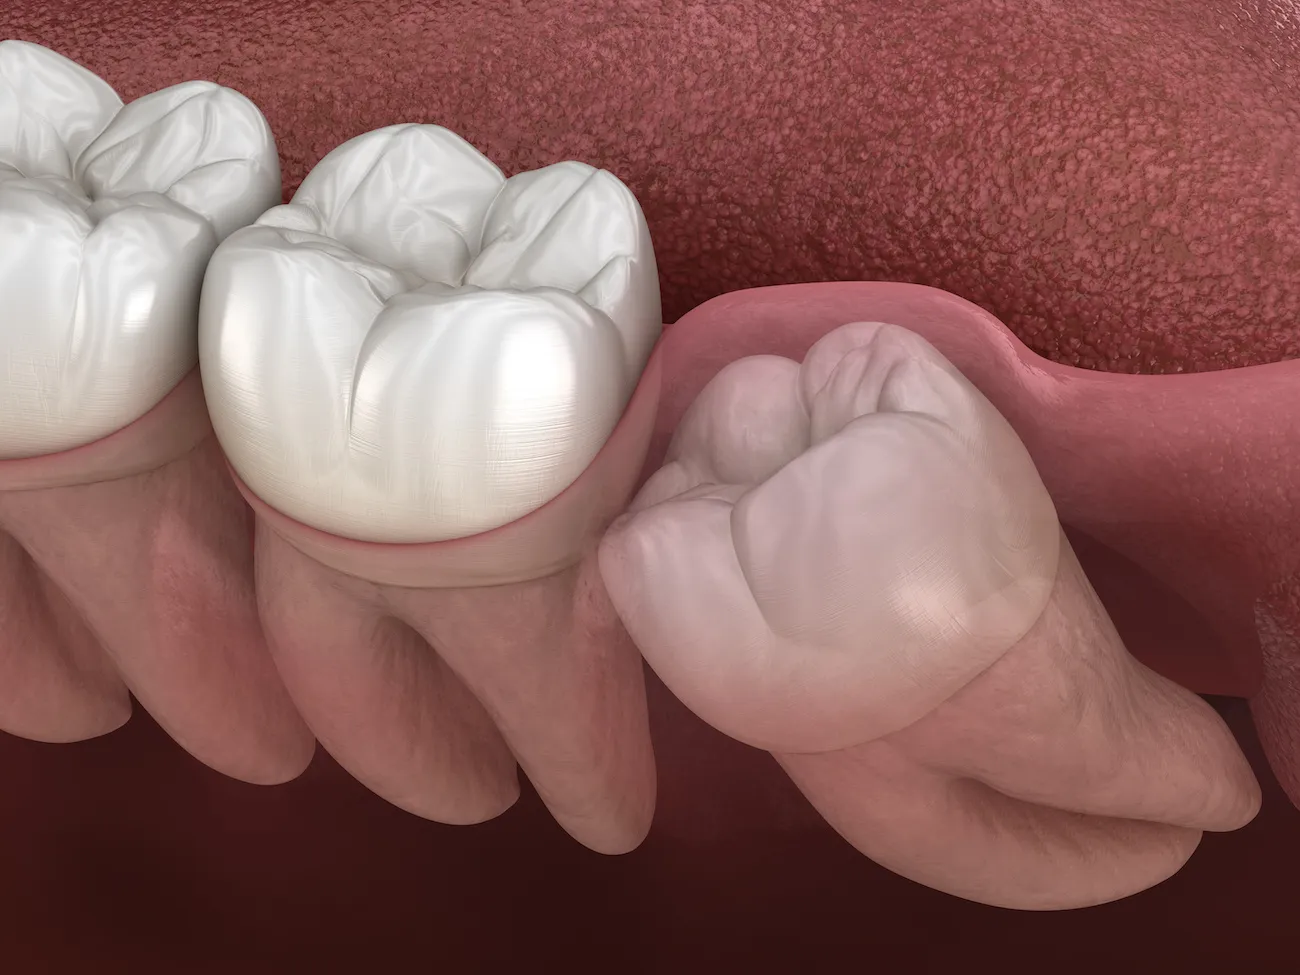 Oral and Maxillofacial Surgery in Glendale